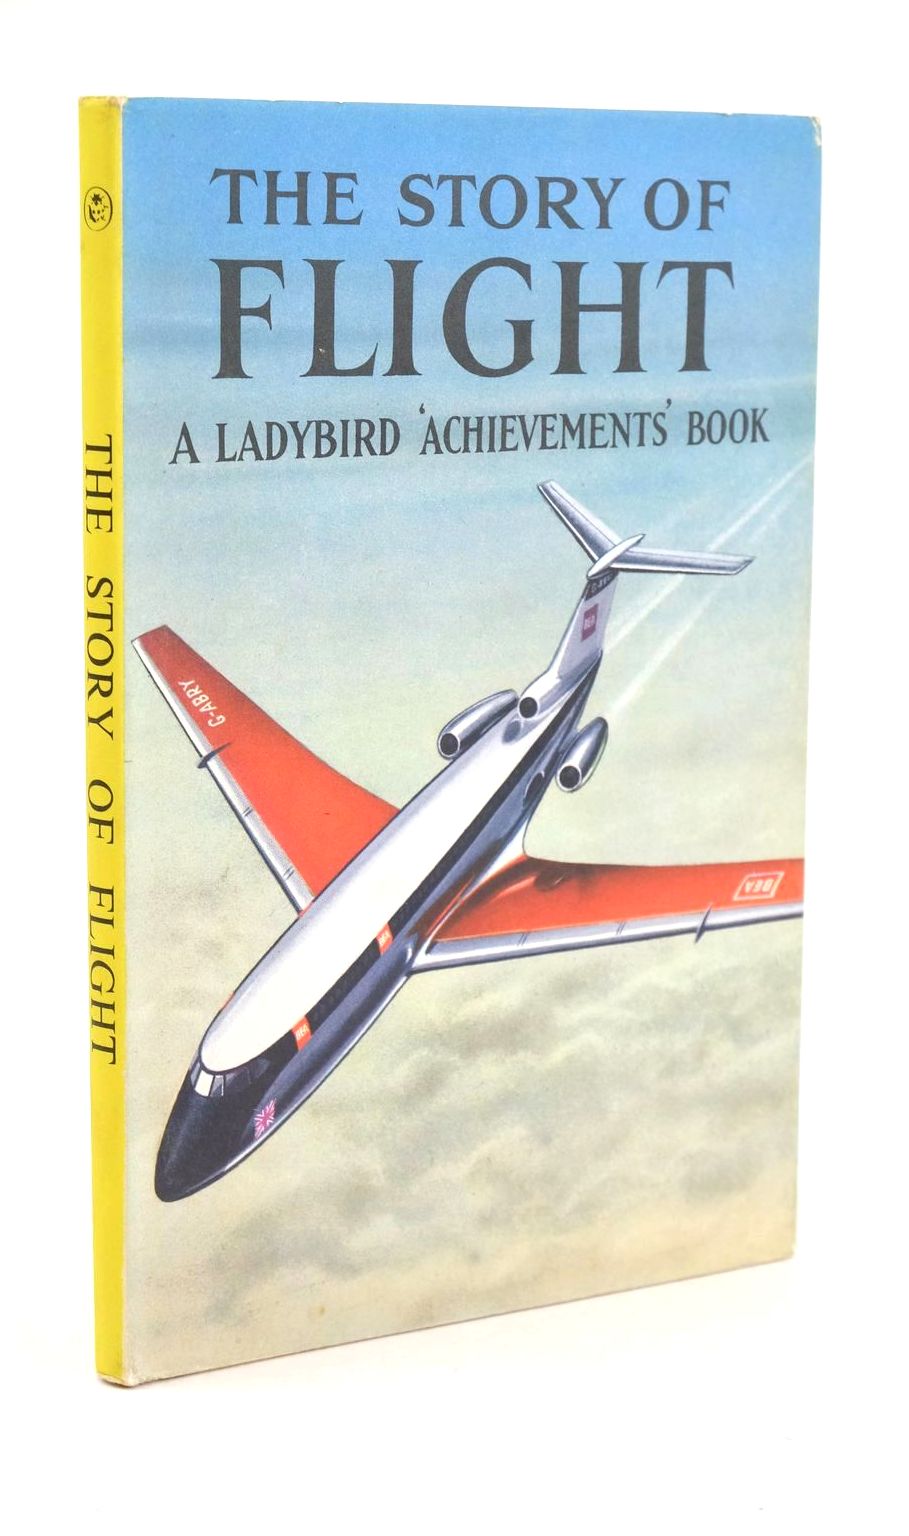 Photo of THE STORY OF FLIGHT written by Bowood, Richard illustrated by Ayton, Robert published by Wills & Hepworth Ltd. (STOCK CODE: 1324671)  for sale by Stella & Rose's Books